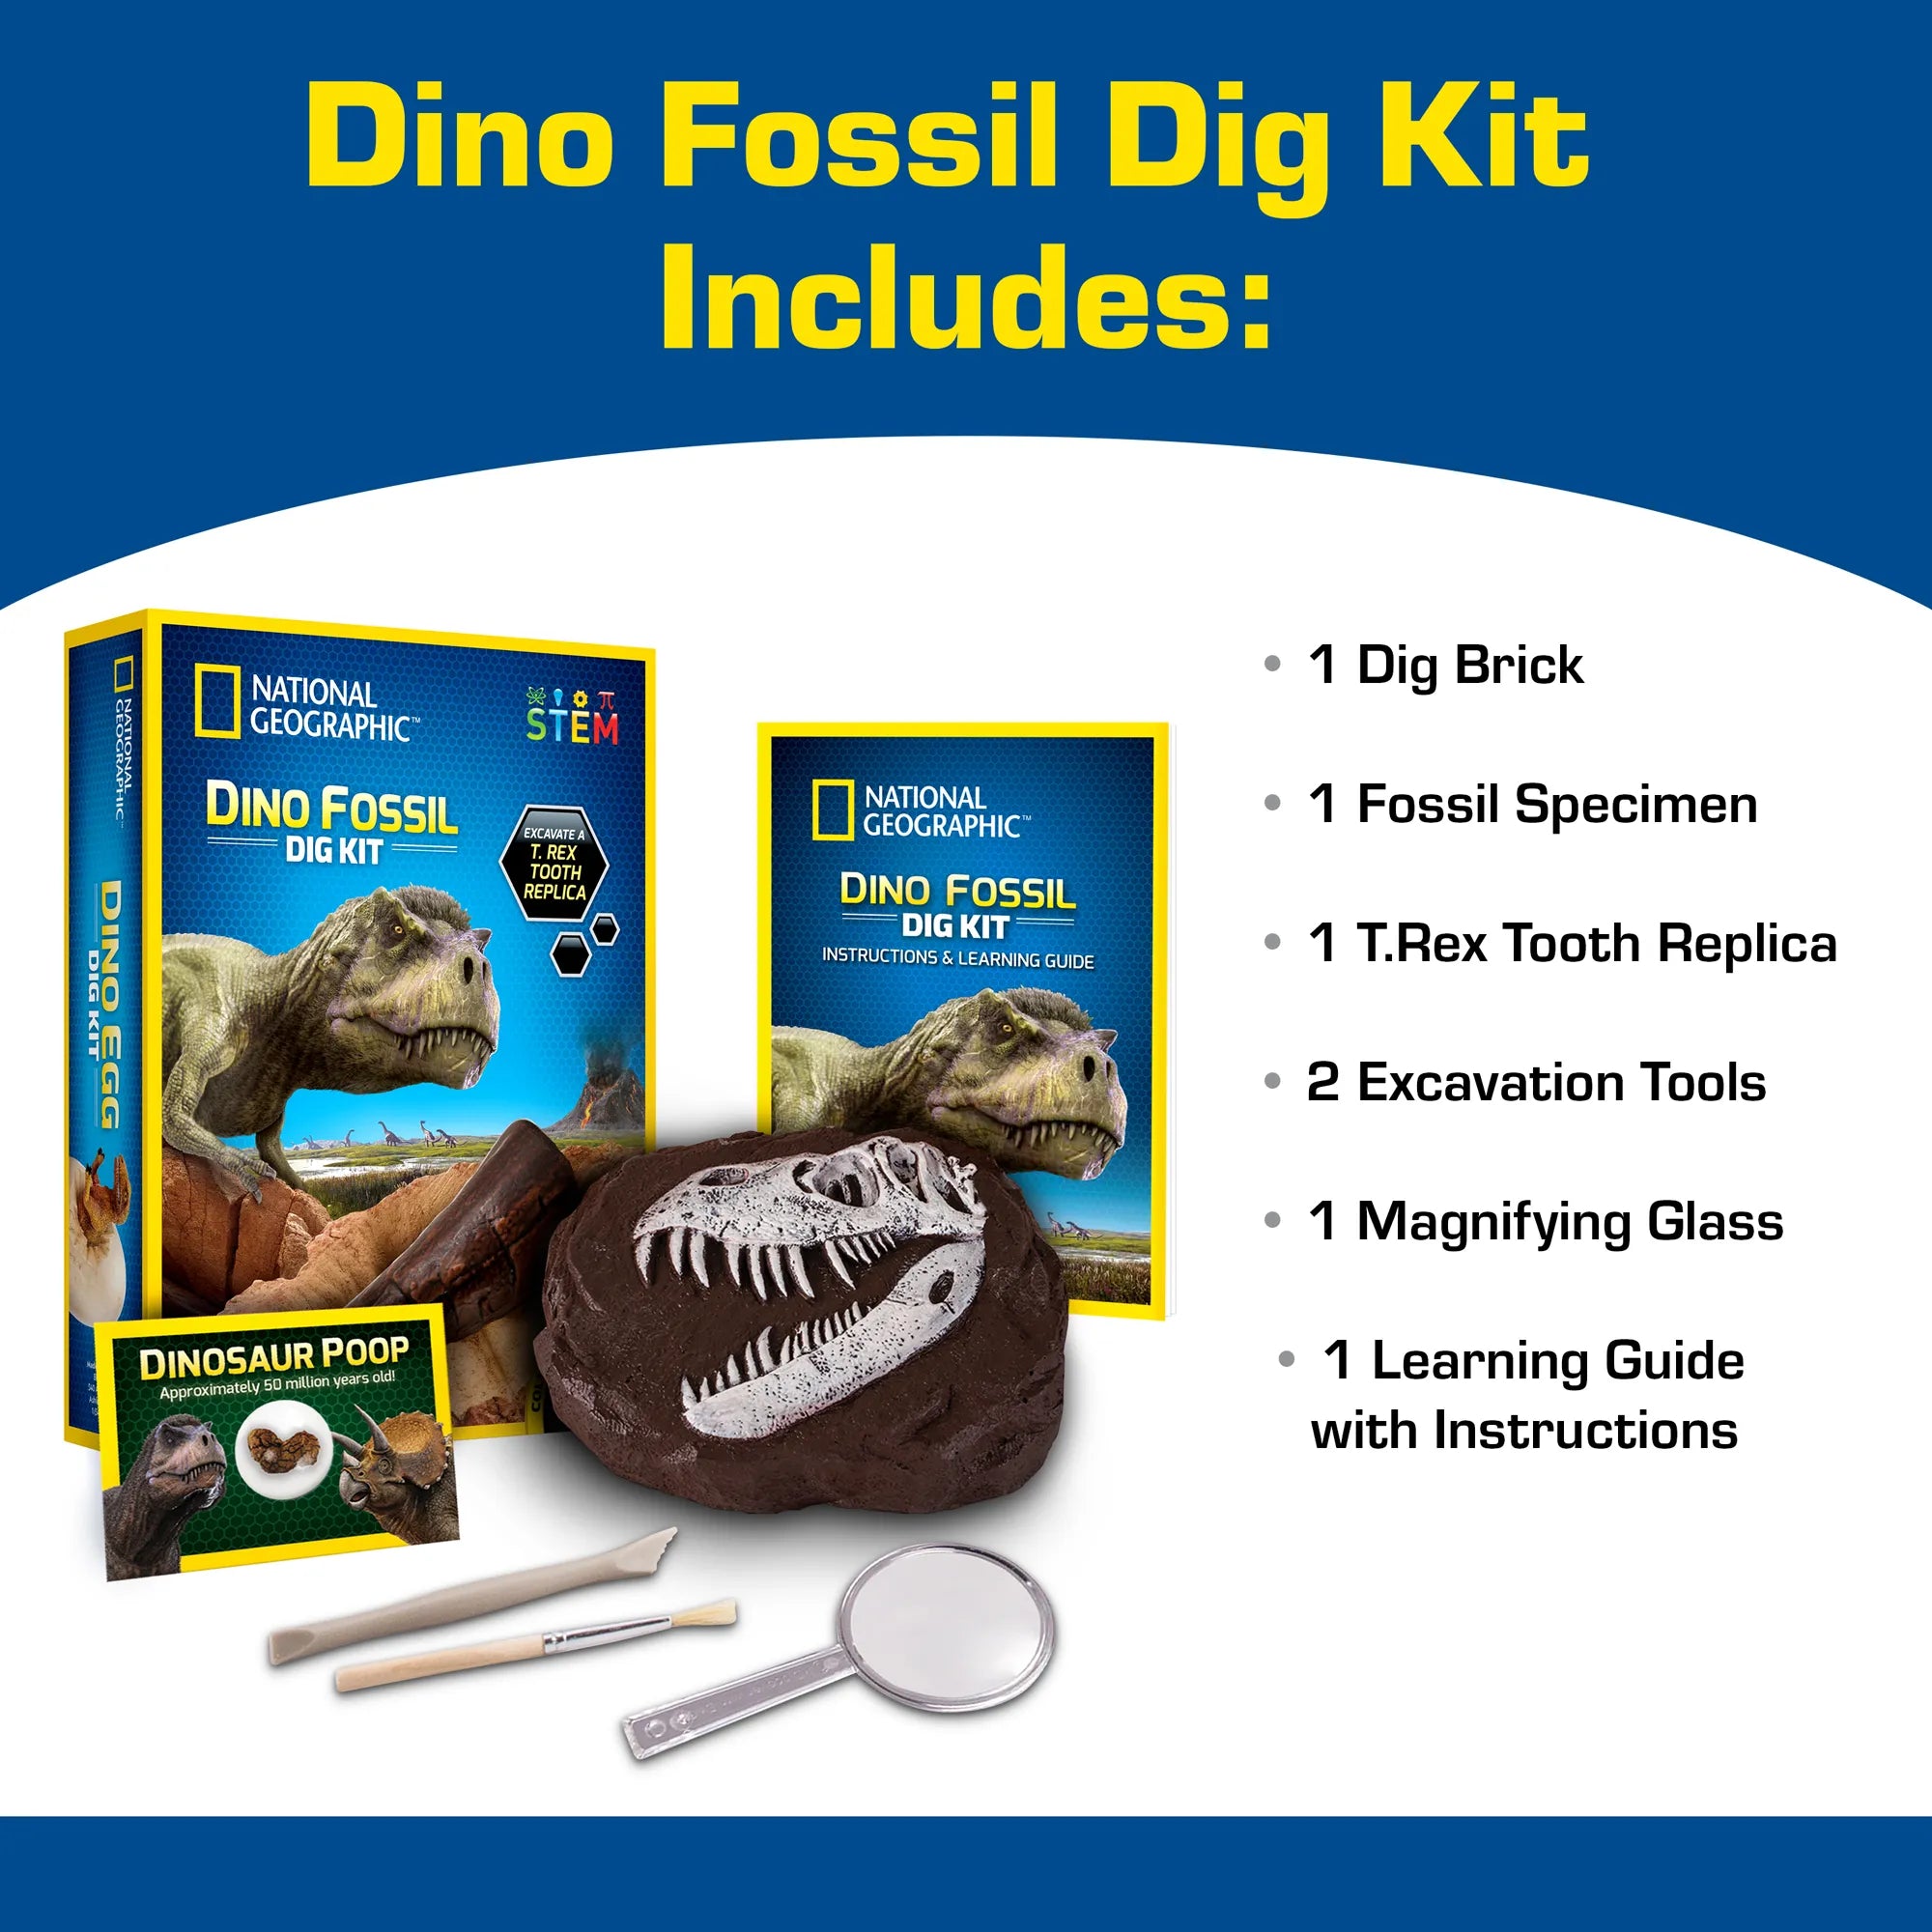 National Geographic Dino Fossil Dig Kit - Age 8+ - Brown's Hobby & Game